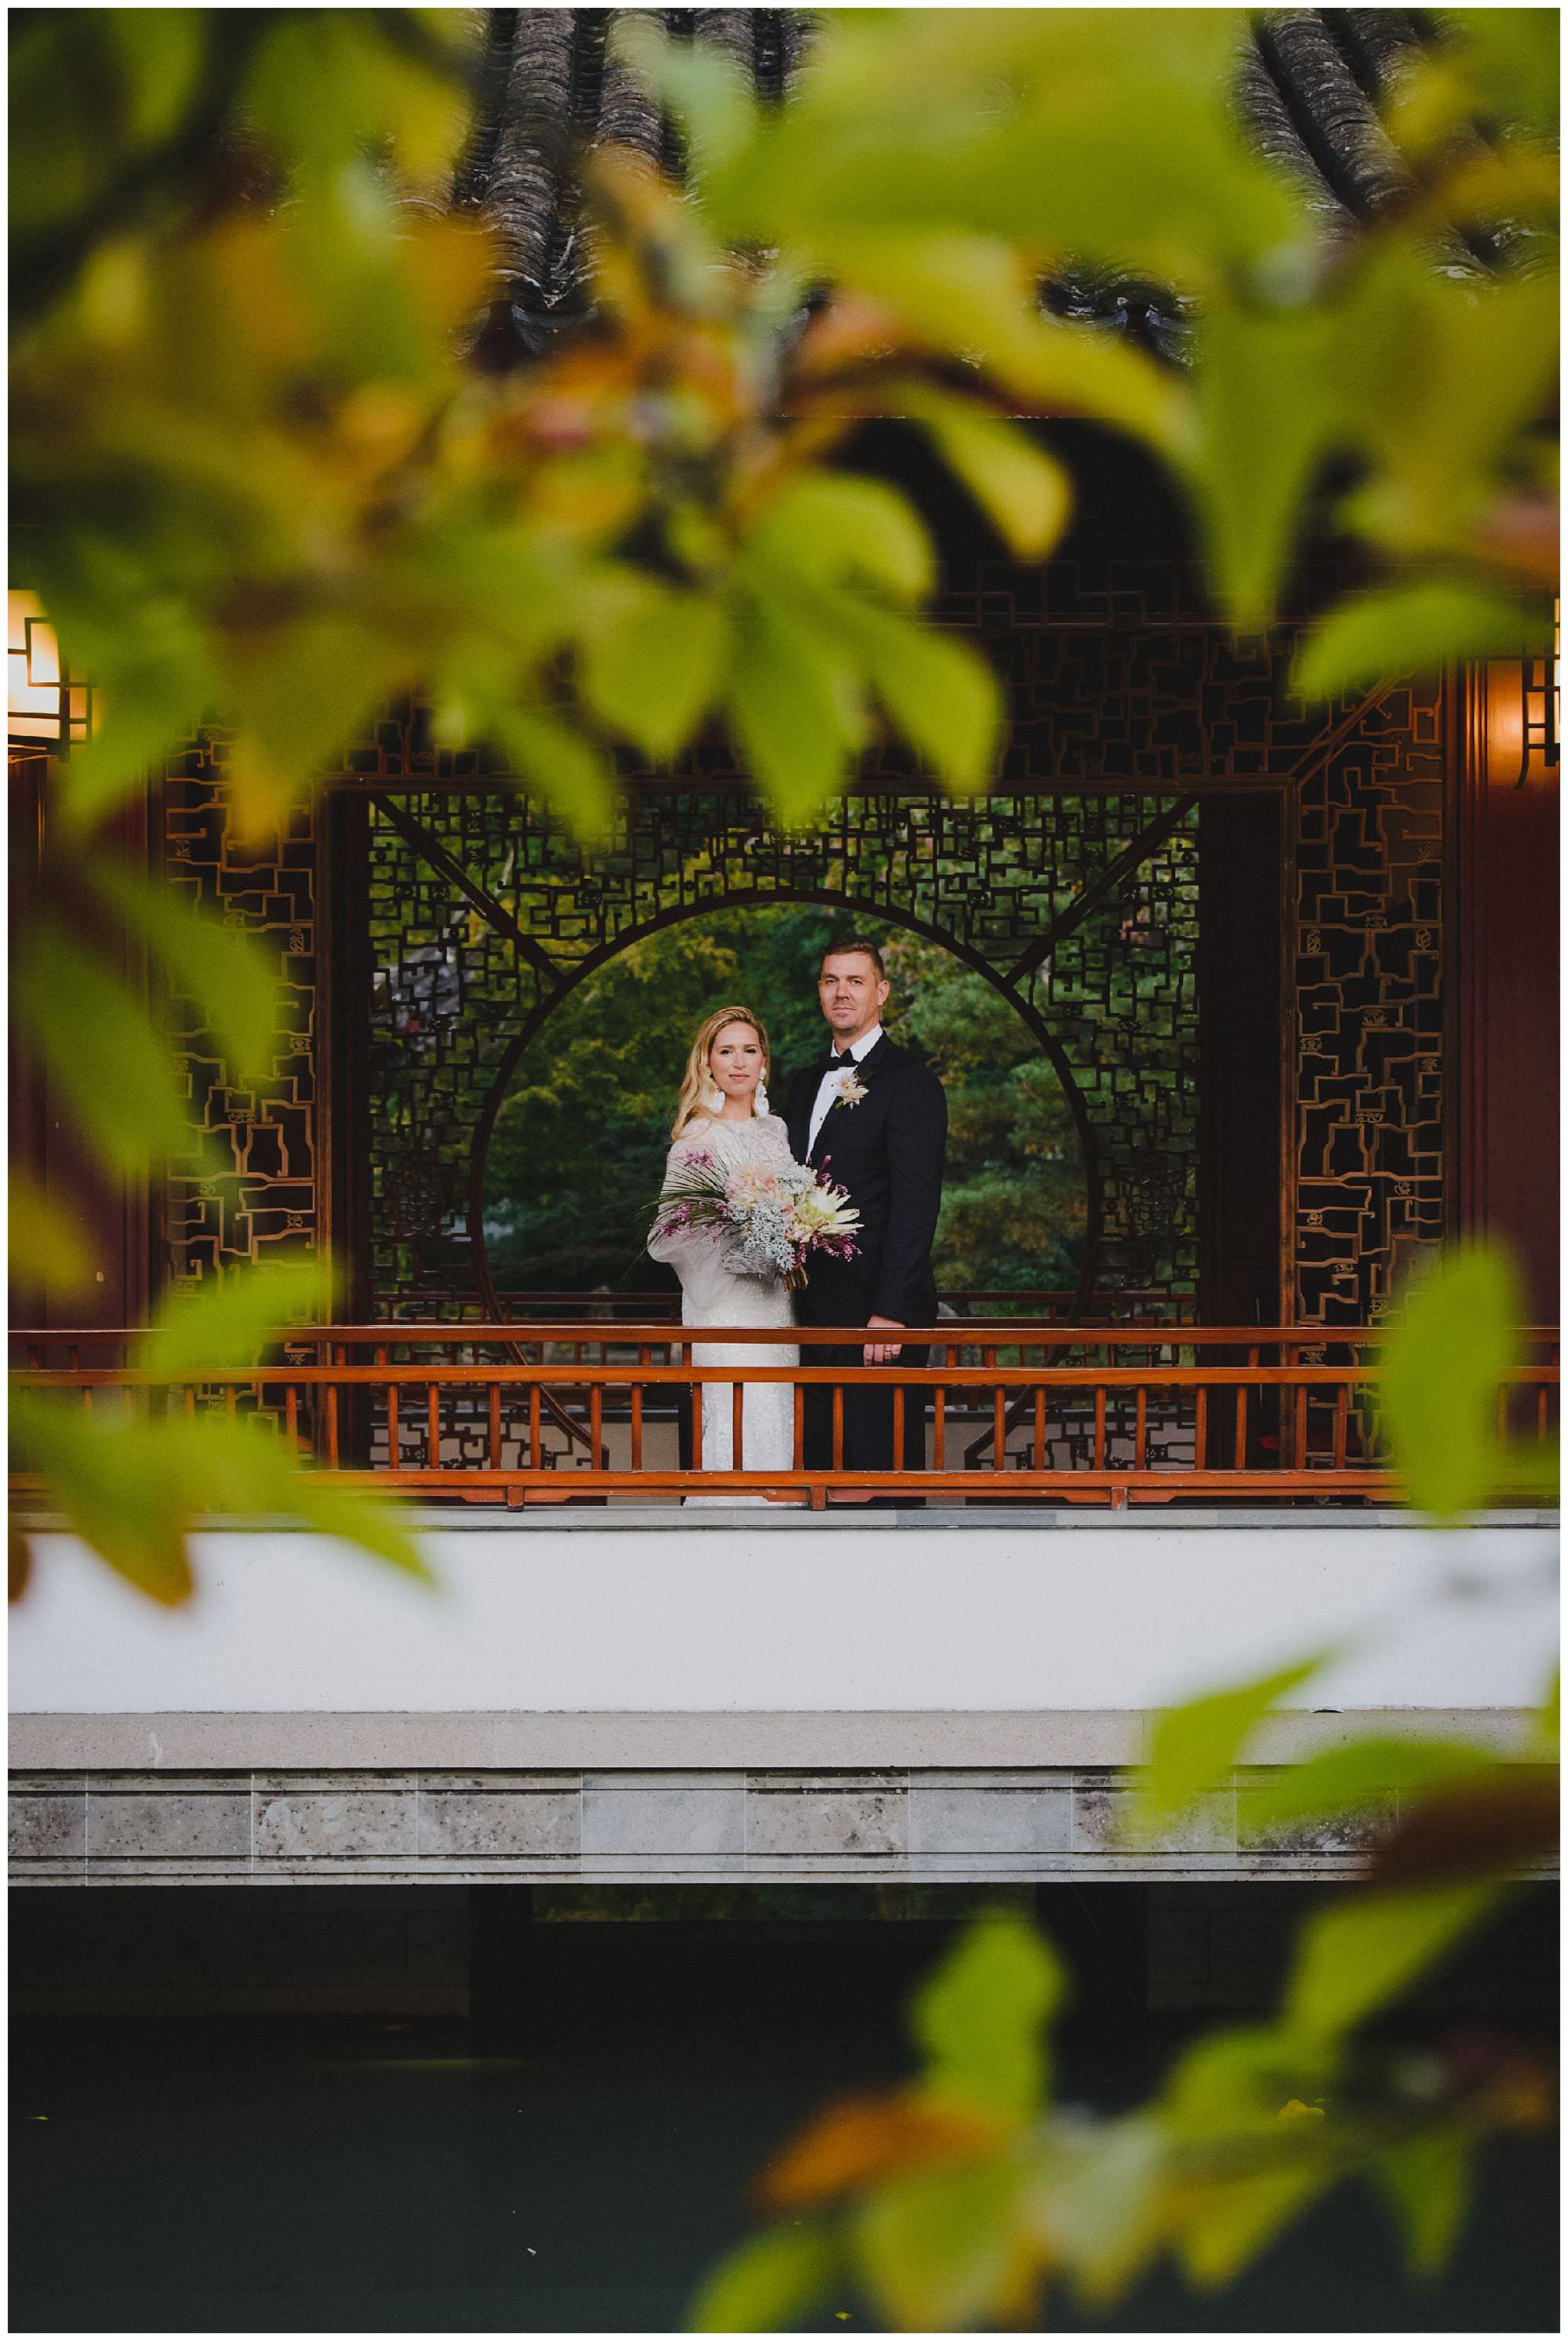 Bride and Groom at sunset after their wedding ceremony at Dr. Sun Yat-Sen Classical Chinese Gardens, elopement, intimate wedding, mature bride and groom